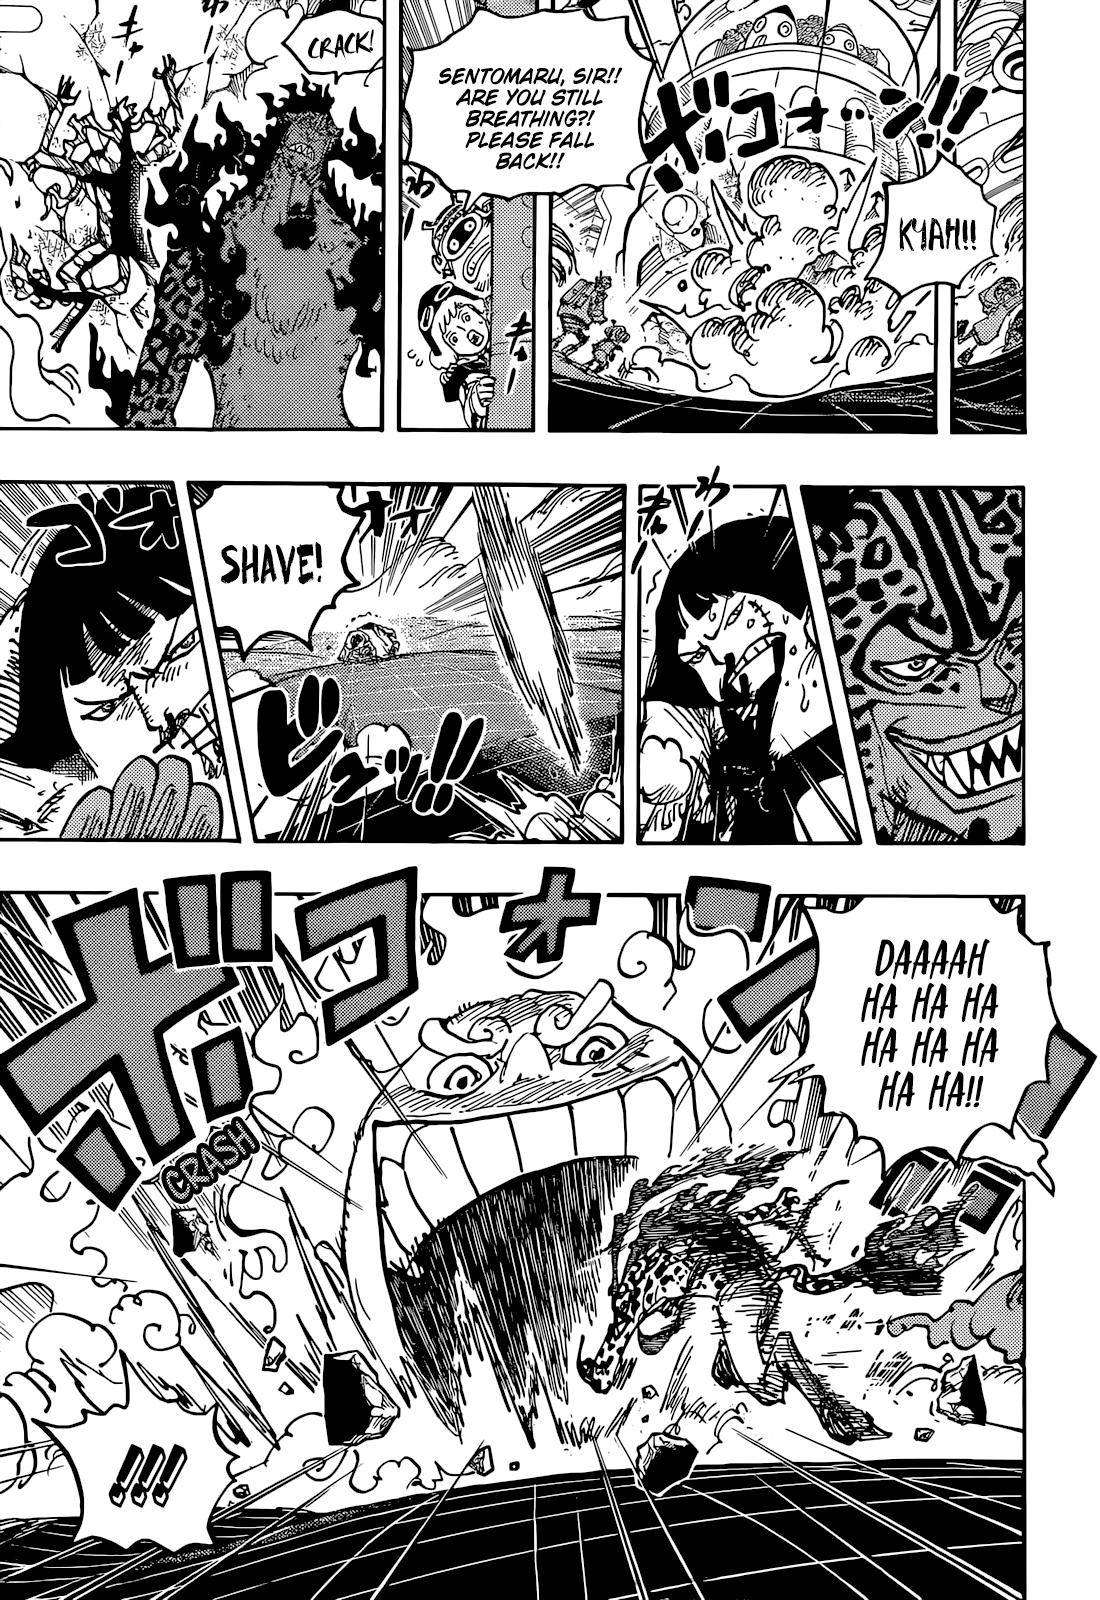 Read One Piece Chapter 1070 10